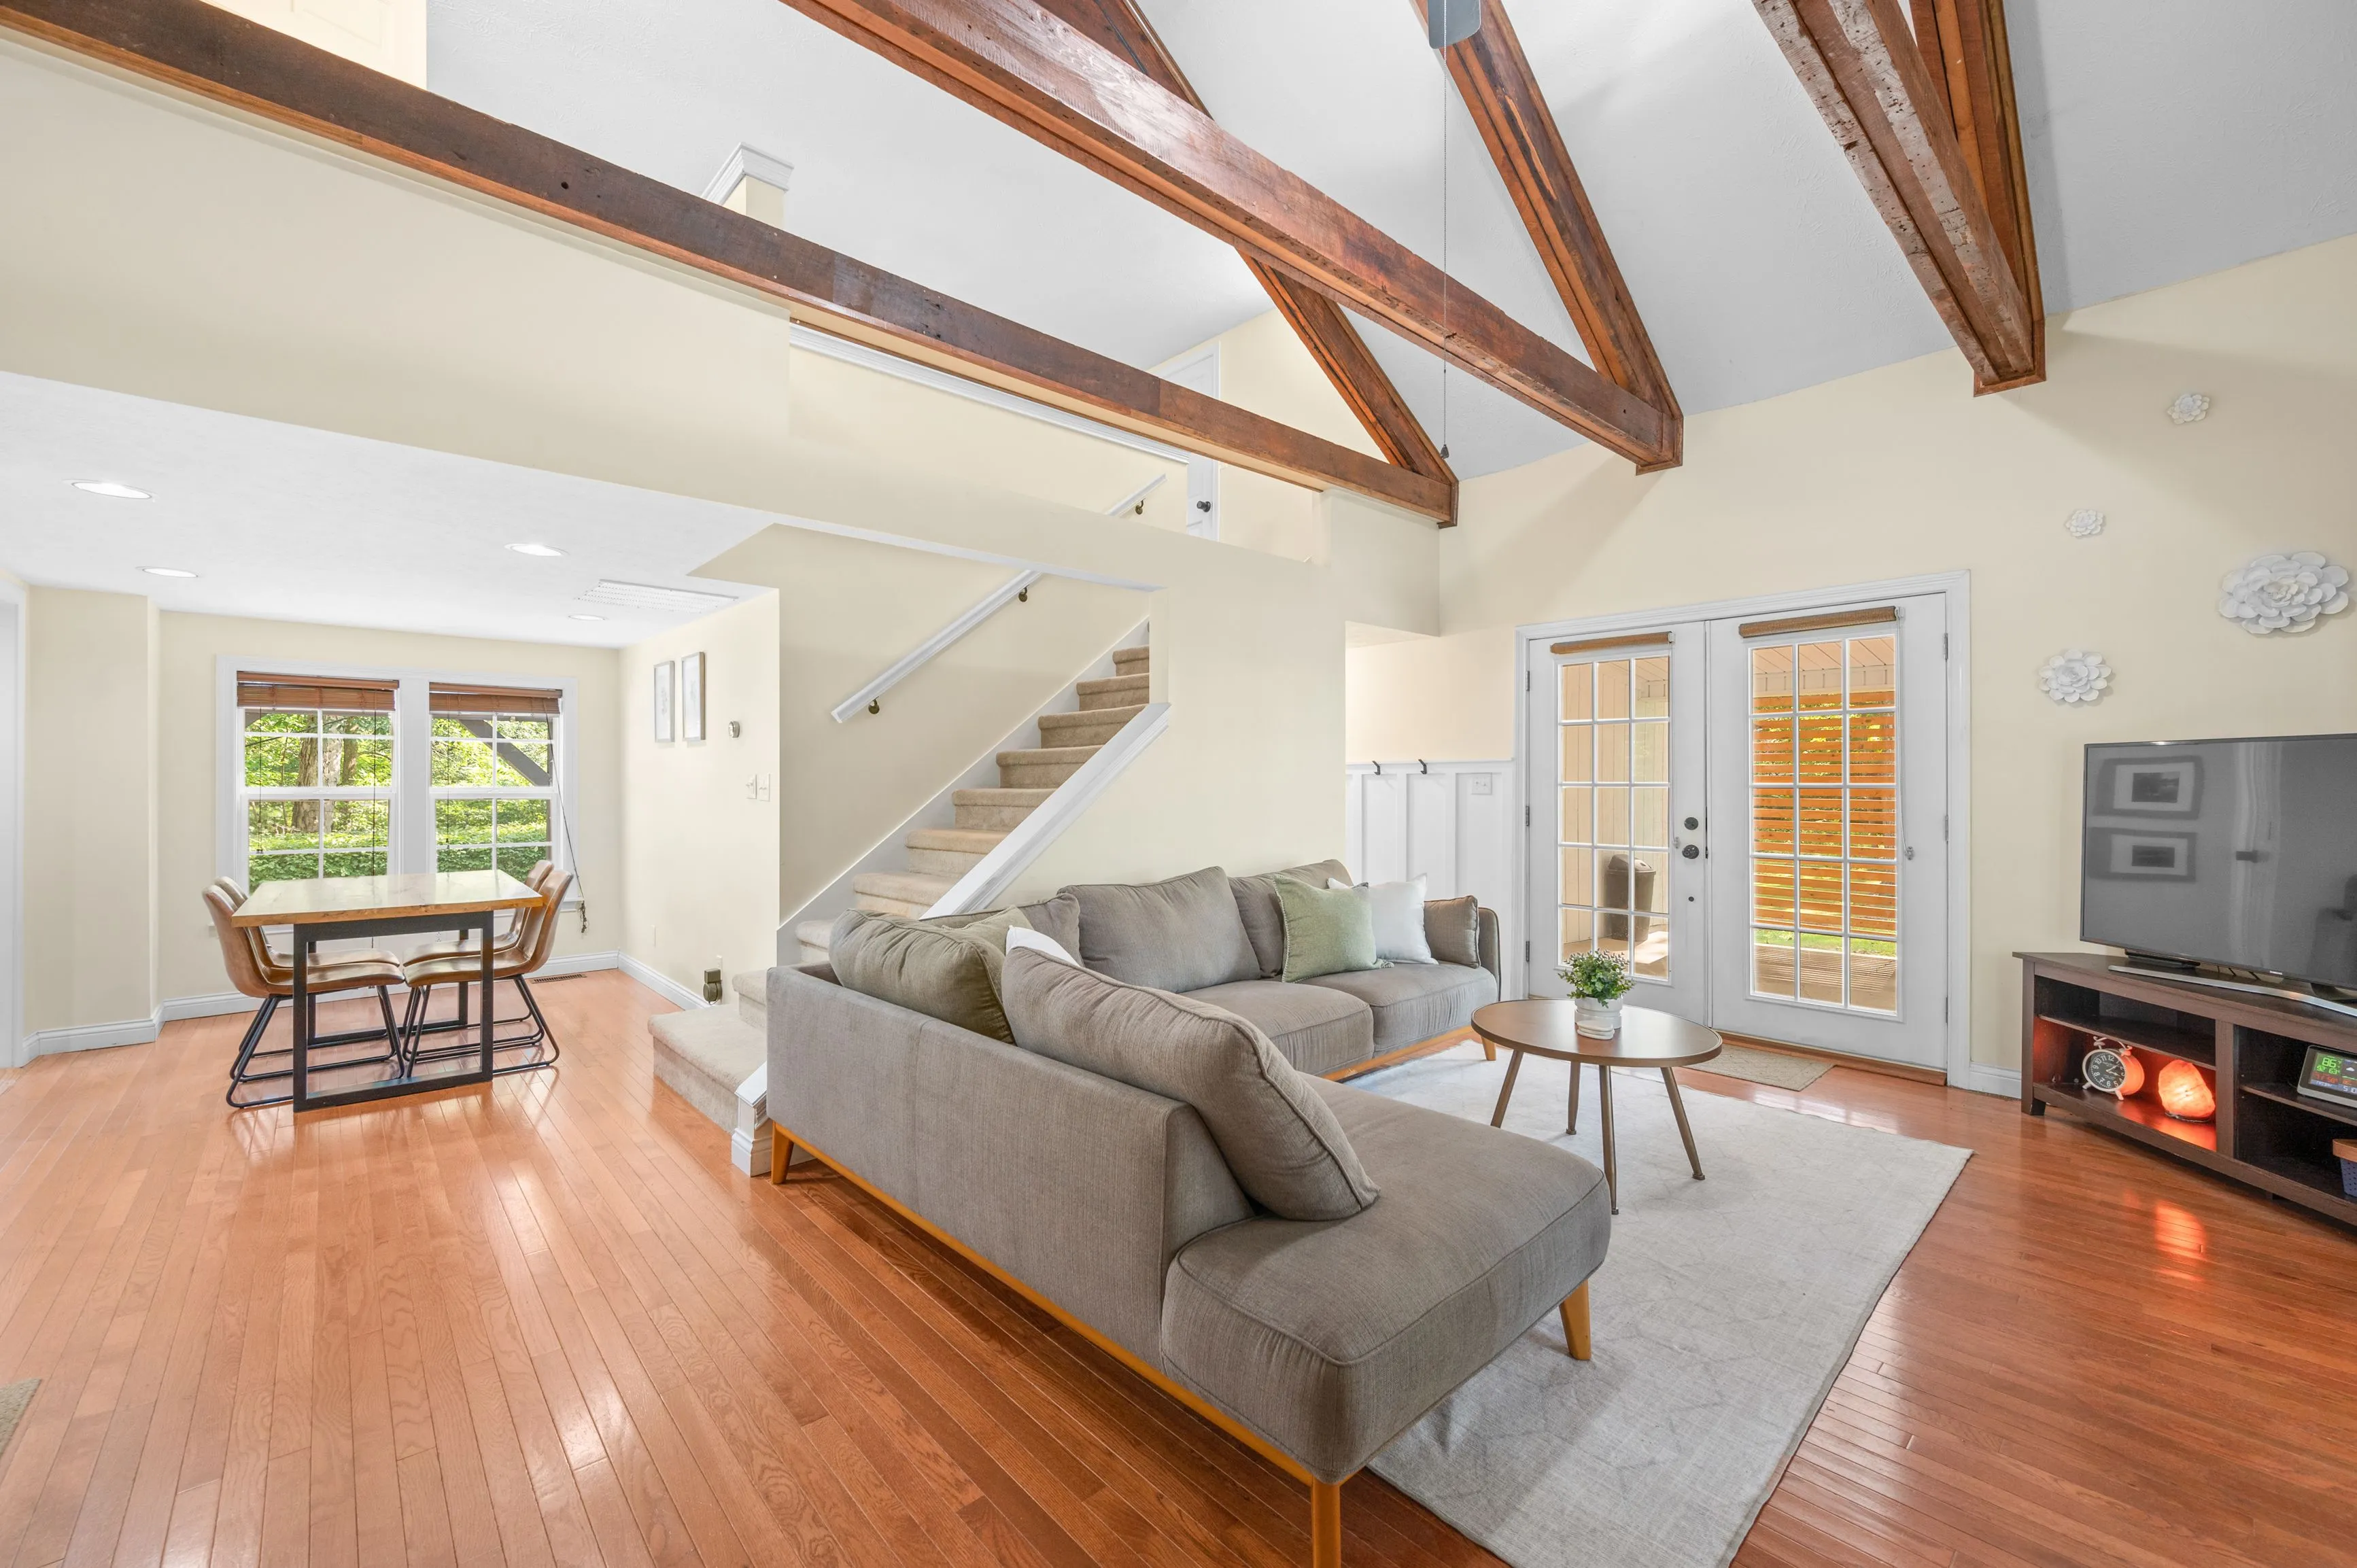 Bright living room interior with hardwood floors, a sectional sofa, a fireplace, exposed wooden beams on the ceiling, and stairs leading to the upper level.